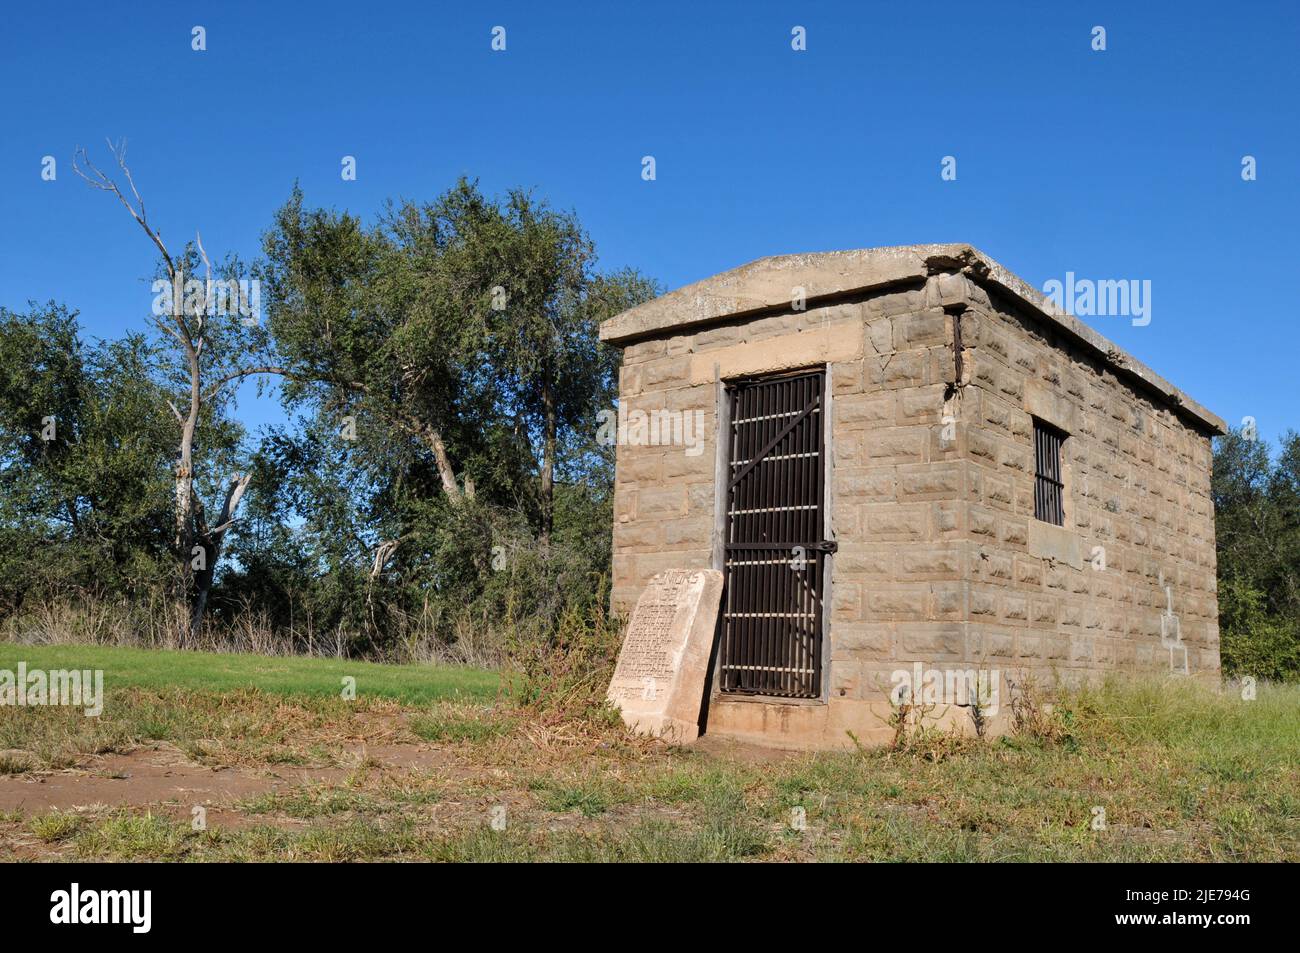 The historic one-room cinderblock jail stands in a field in the small Route 66 town of Texola, near the Texas state line. Stock Photo